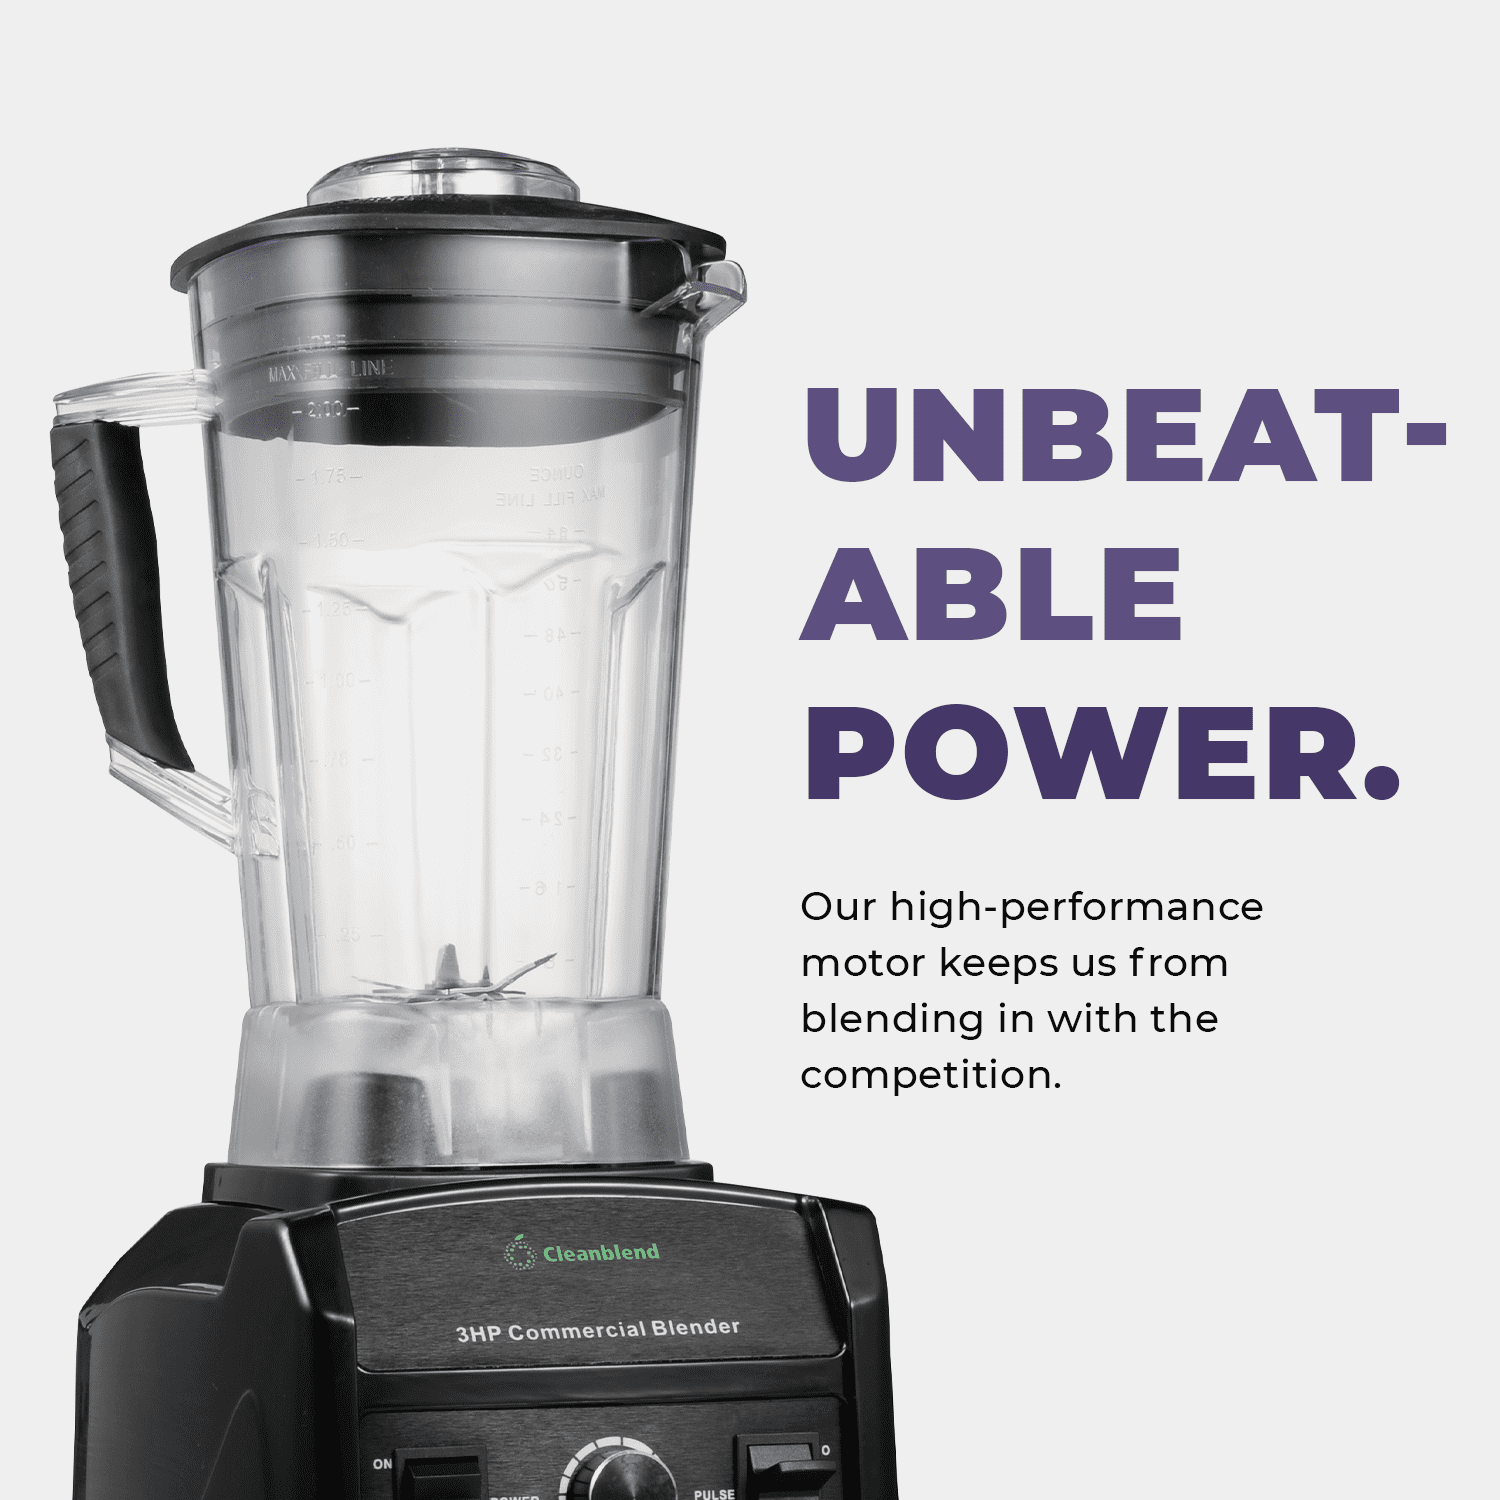 Assume Amplifier To expose Cleanblend Smoothie Blender - 3 HP 1800 Watt high speed Motor for Milk  Shakes, Frozen Fruit, Crushing ice, 64 Ounce BPA Free Jar, 8 Sharp  Stainless Steel Blades, Variable Speed control with Pulse - Walmart.com